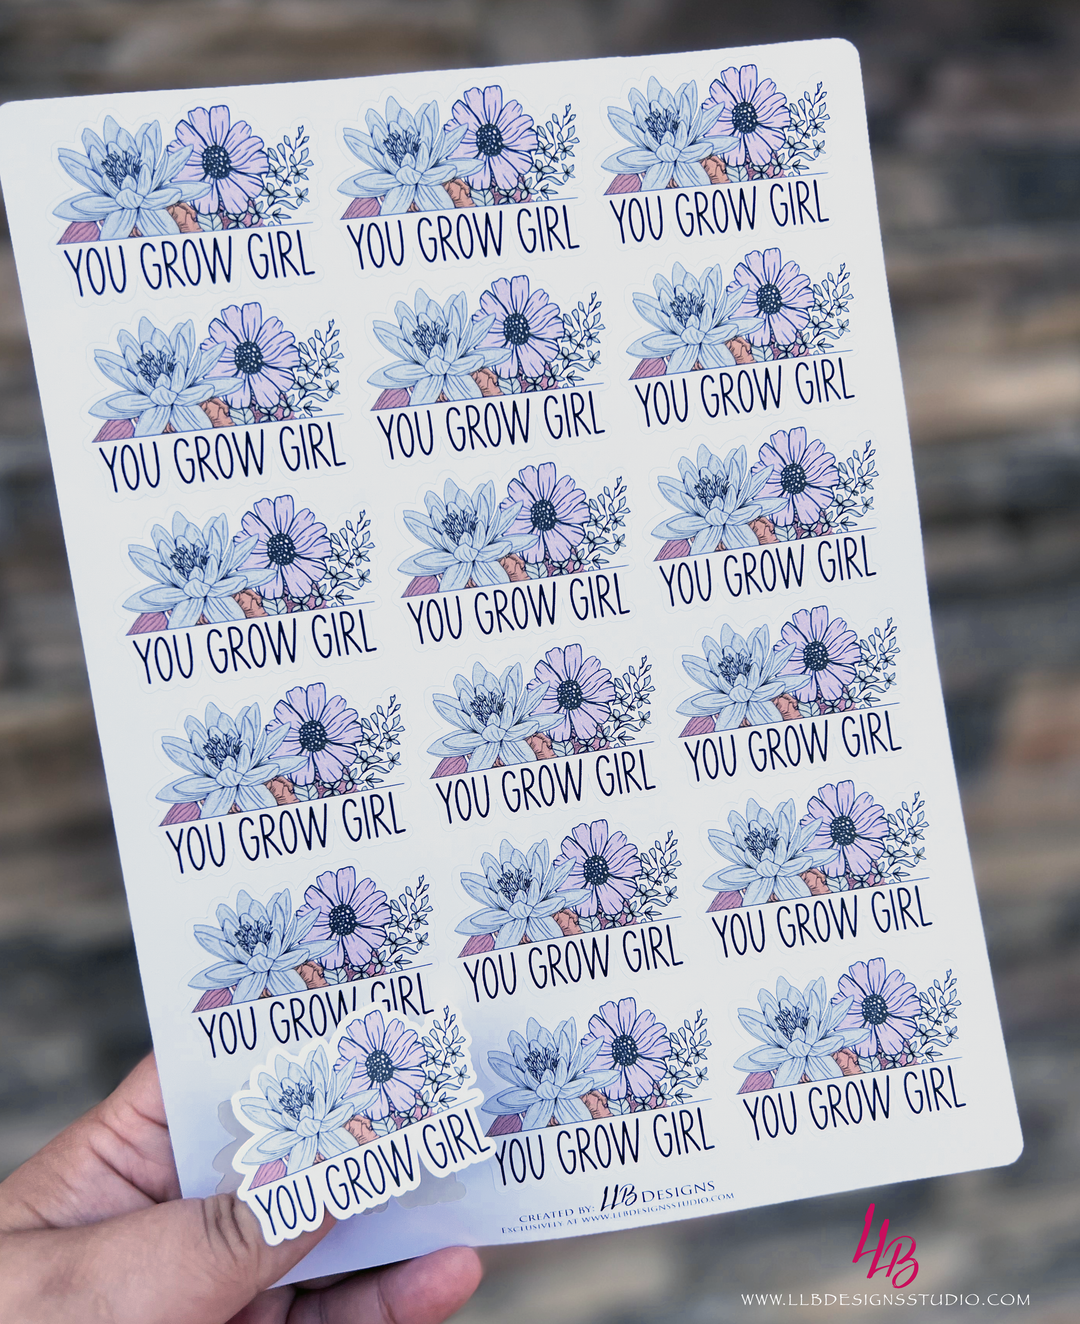 You Glow Girl |  Packaging Stickers | Business Branding | Small Shop Stickers | Sticker #: S0430 | Ready To Ship